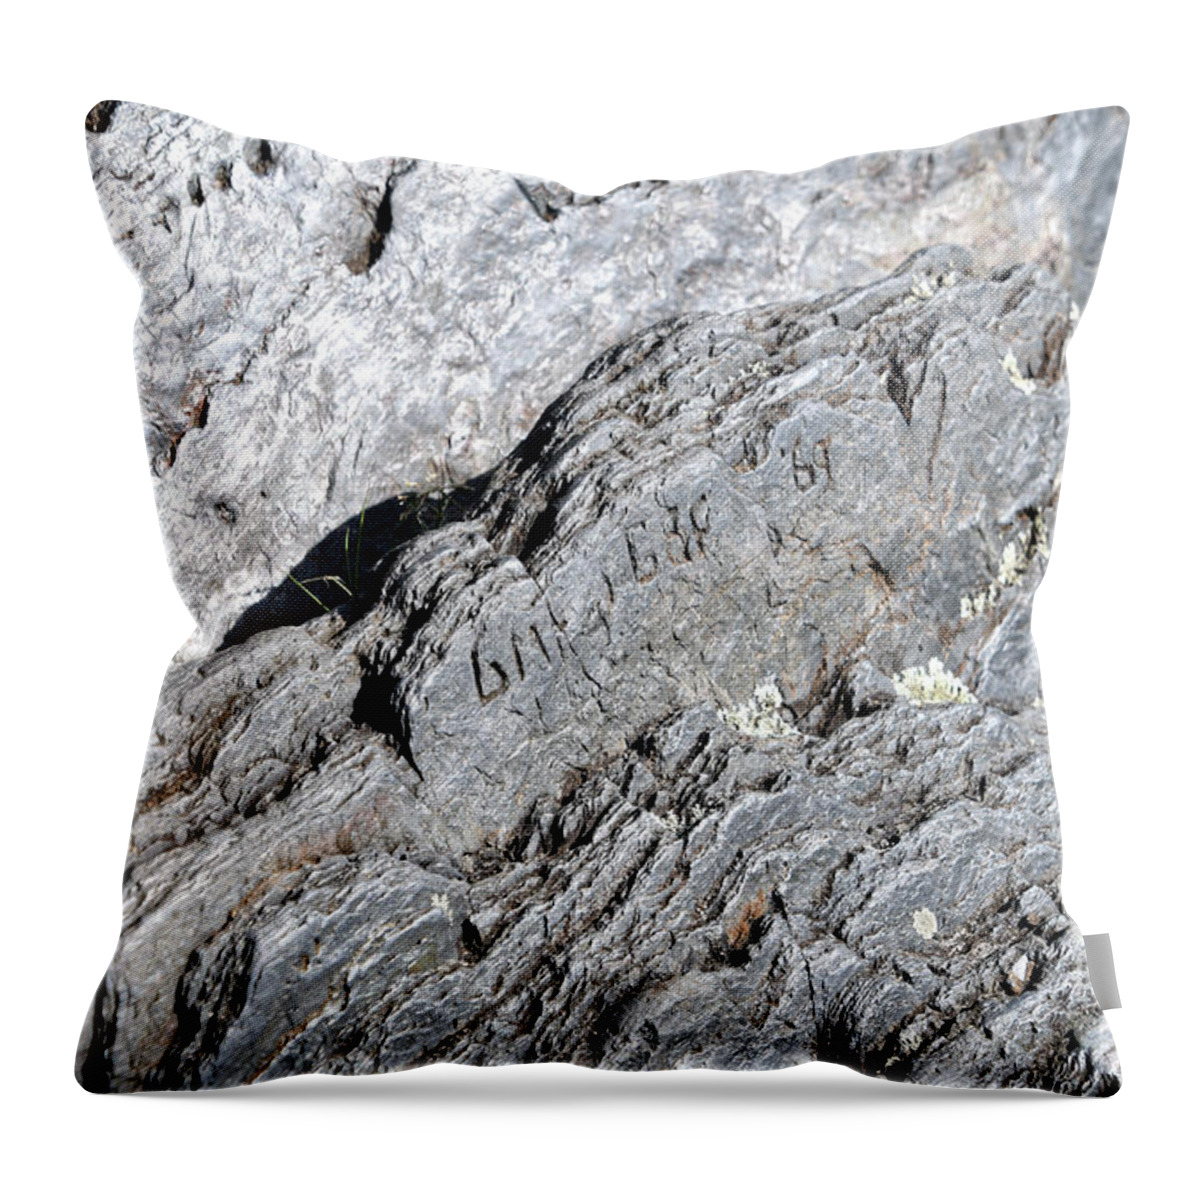 Chimney Tops Throw Pillow featuring the photograph Chimney Tops 16 by Phil Perkins